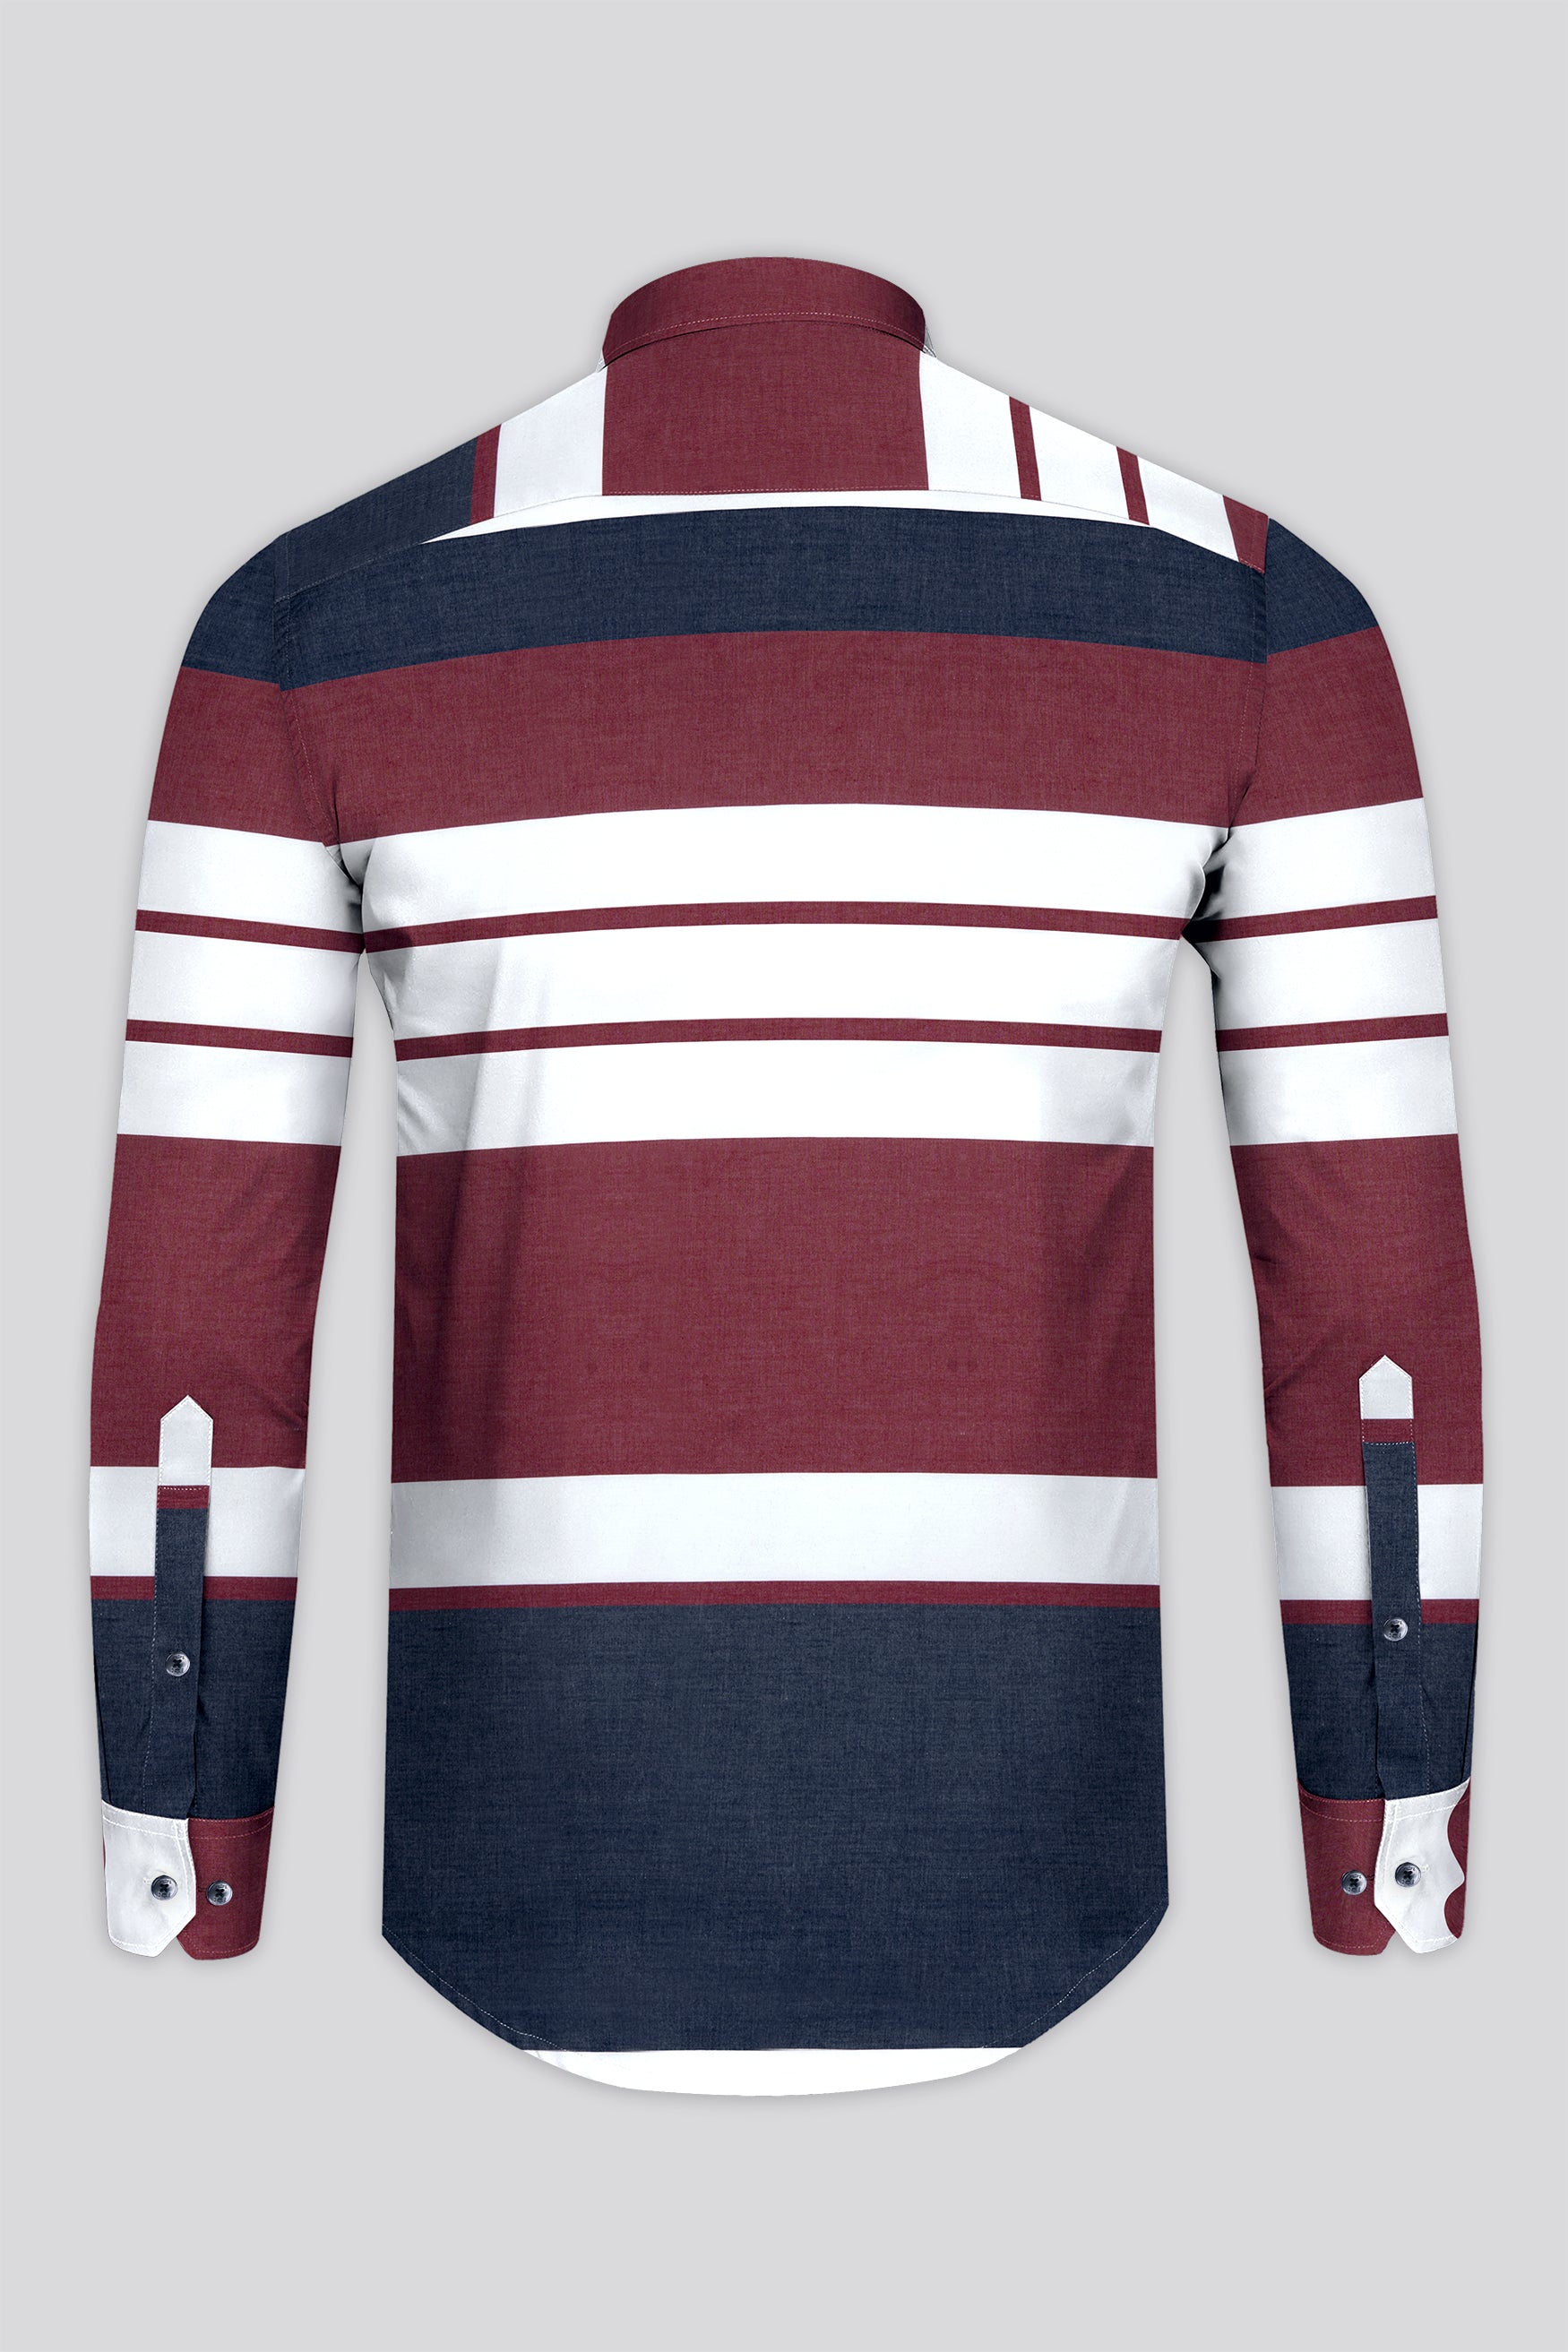 Mauve Red with White and Mirage Navy Blue Striped Super Soft Premium Cotton Shirt